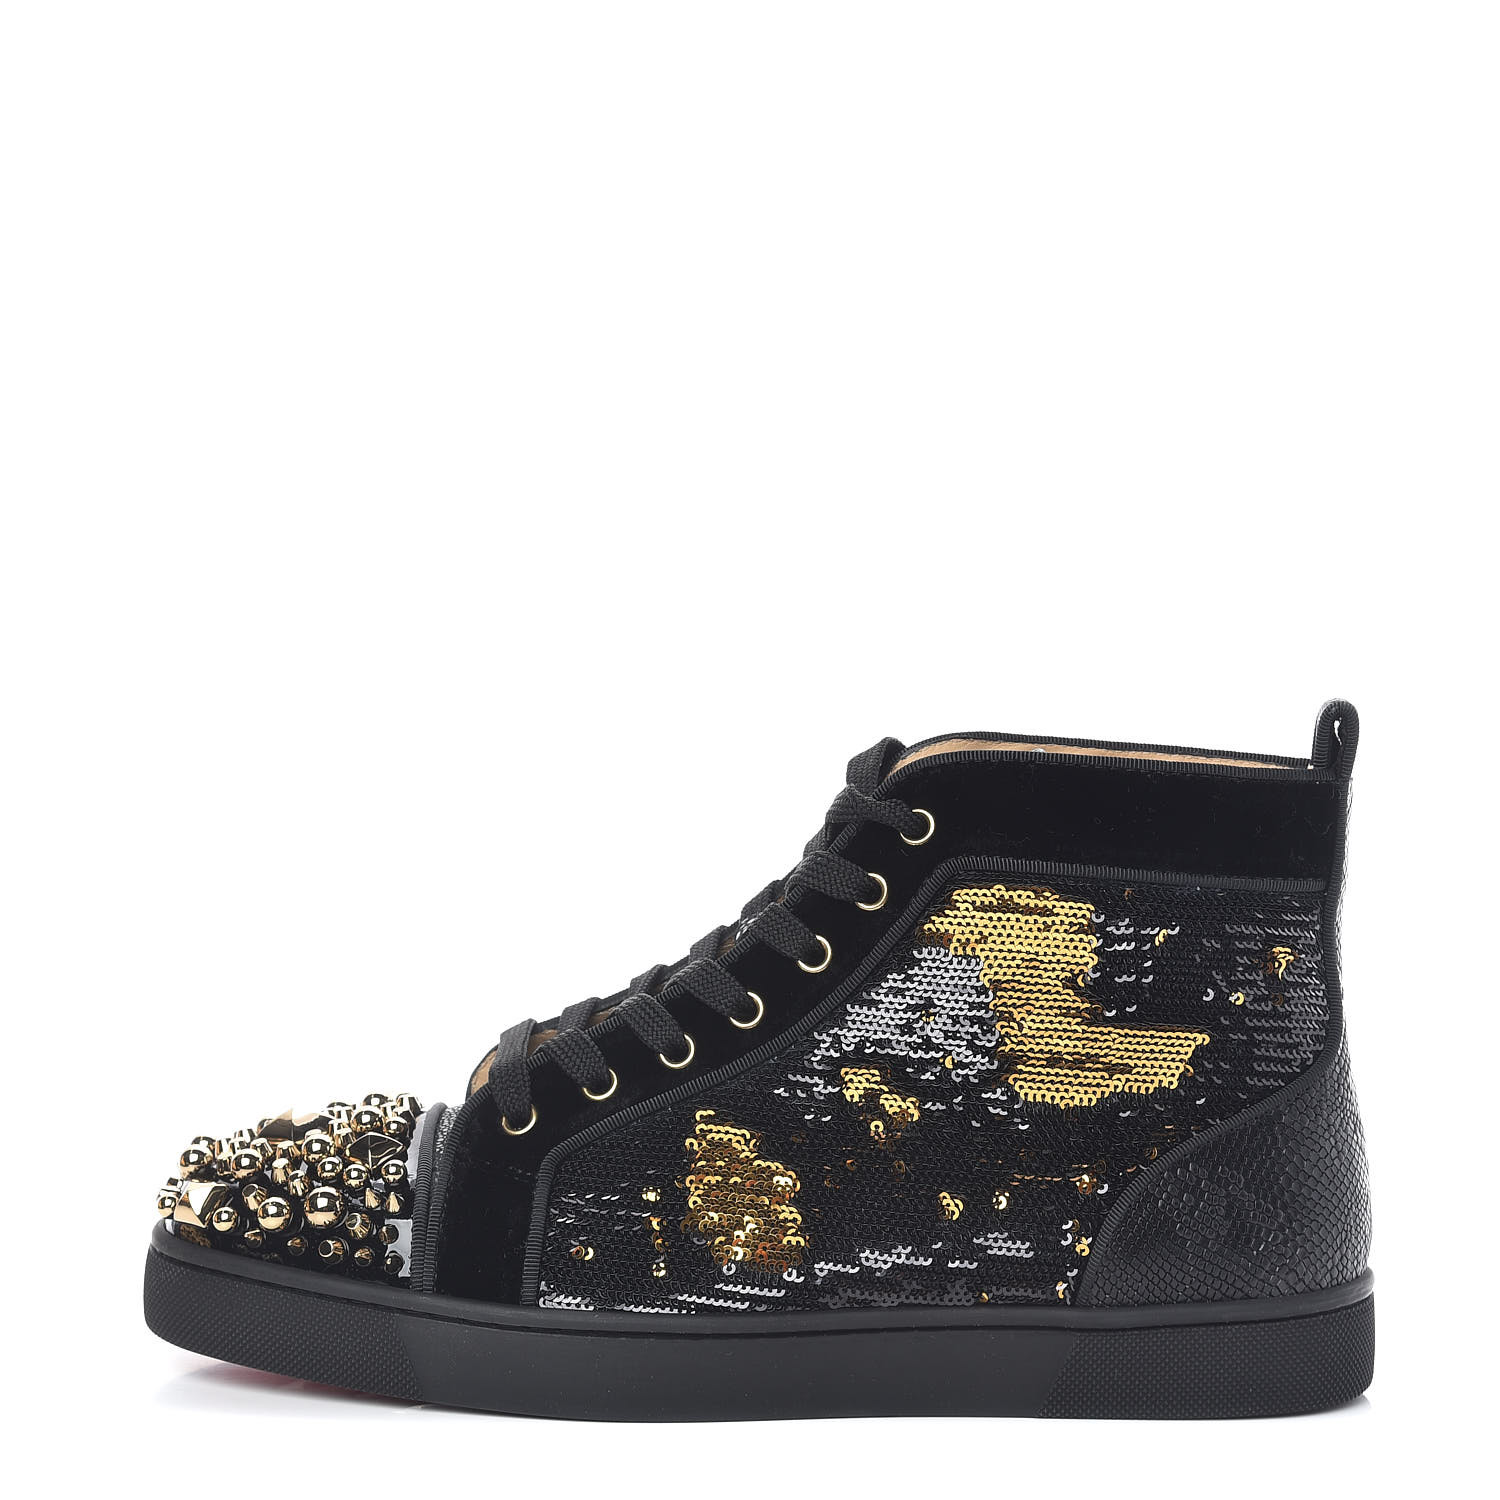 black and gold christian louboutin